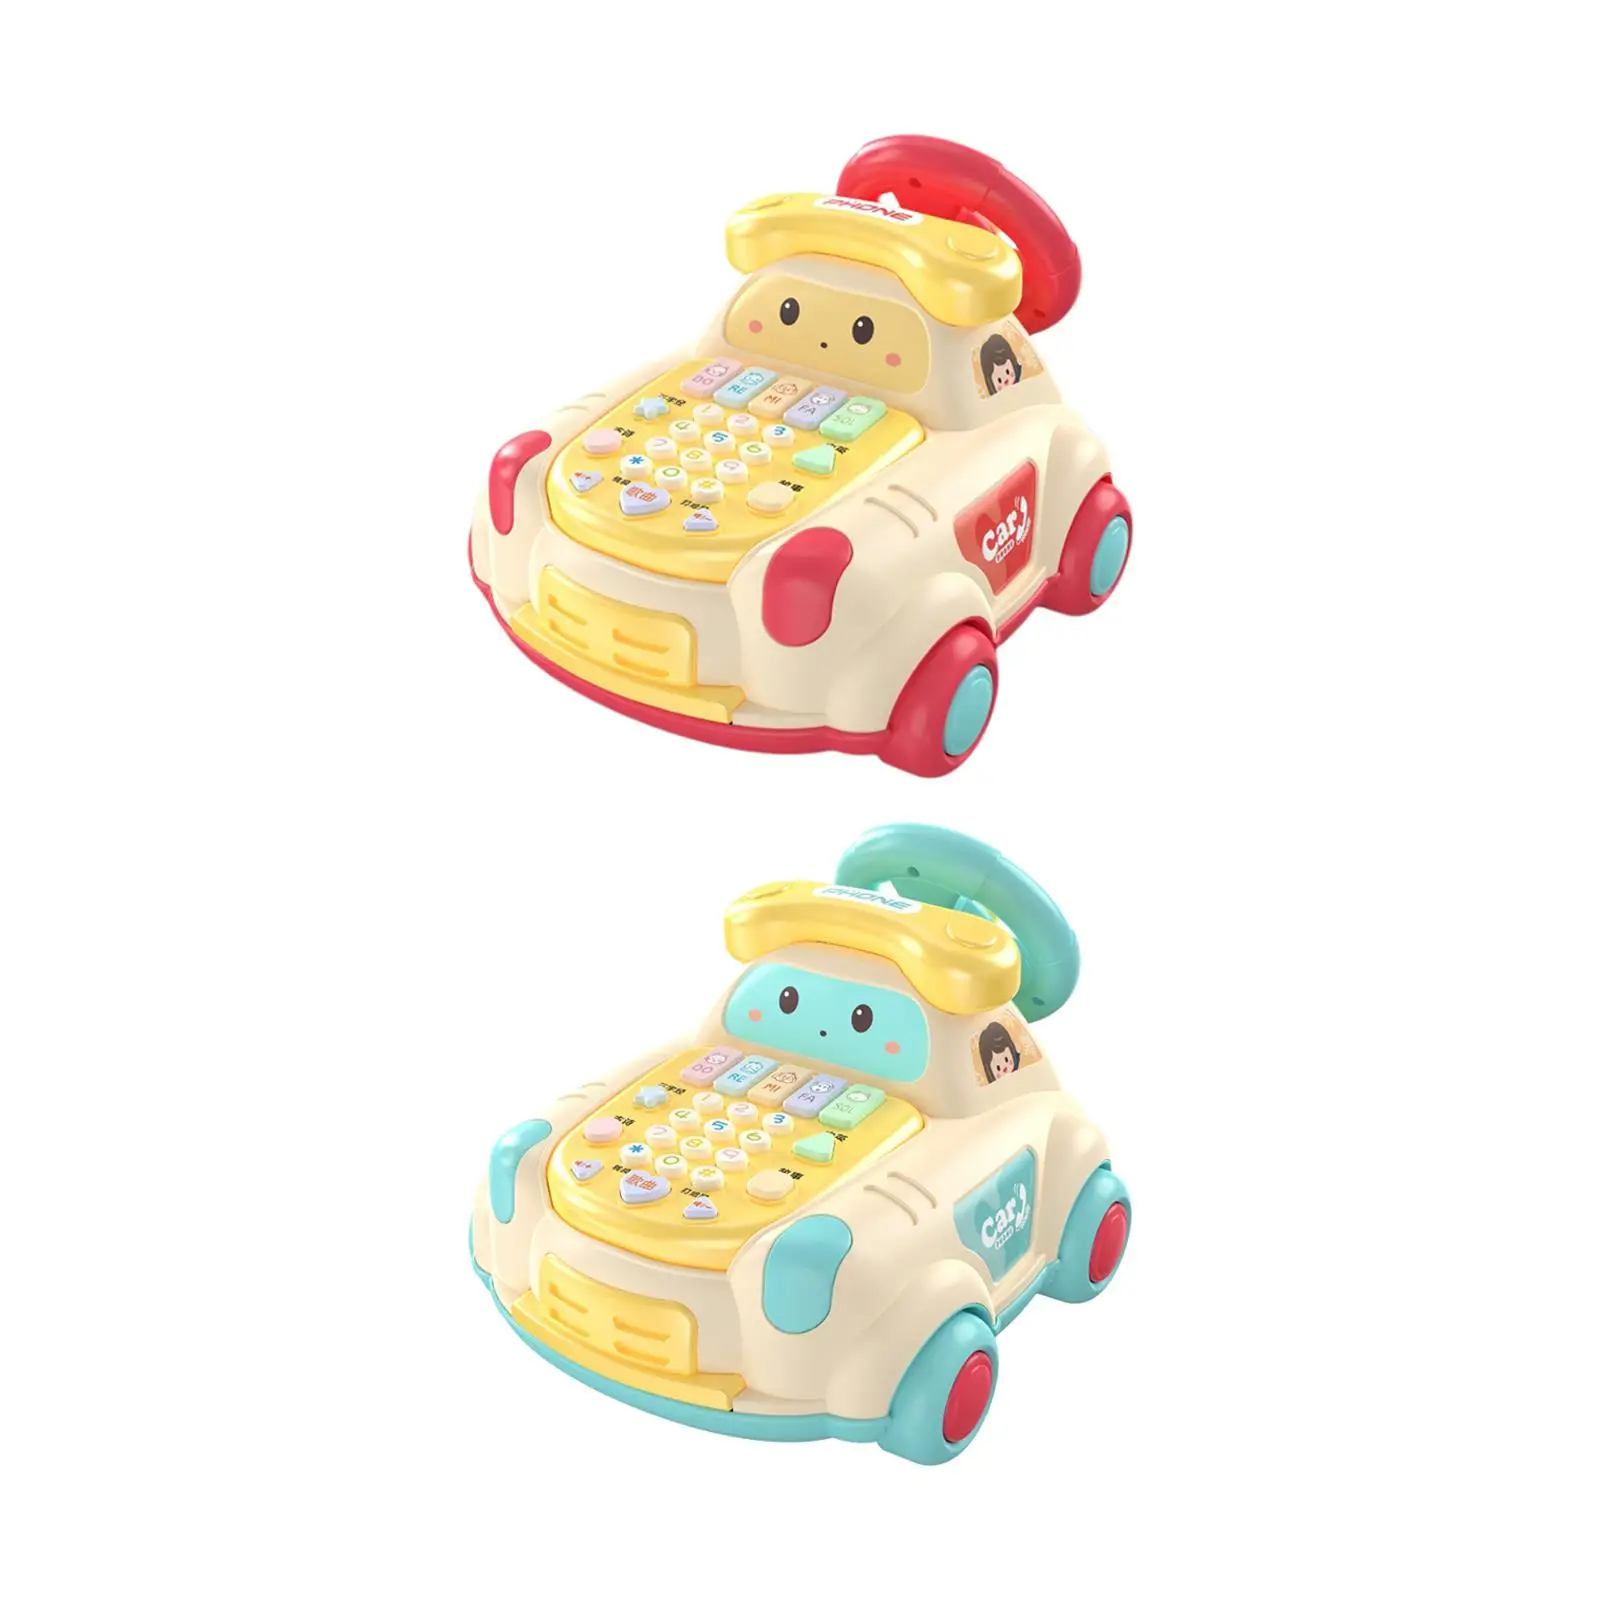 Baby Telephone baby Musical Toys Car for Game Activity Development